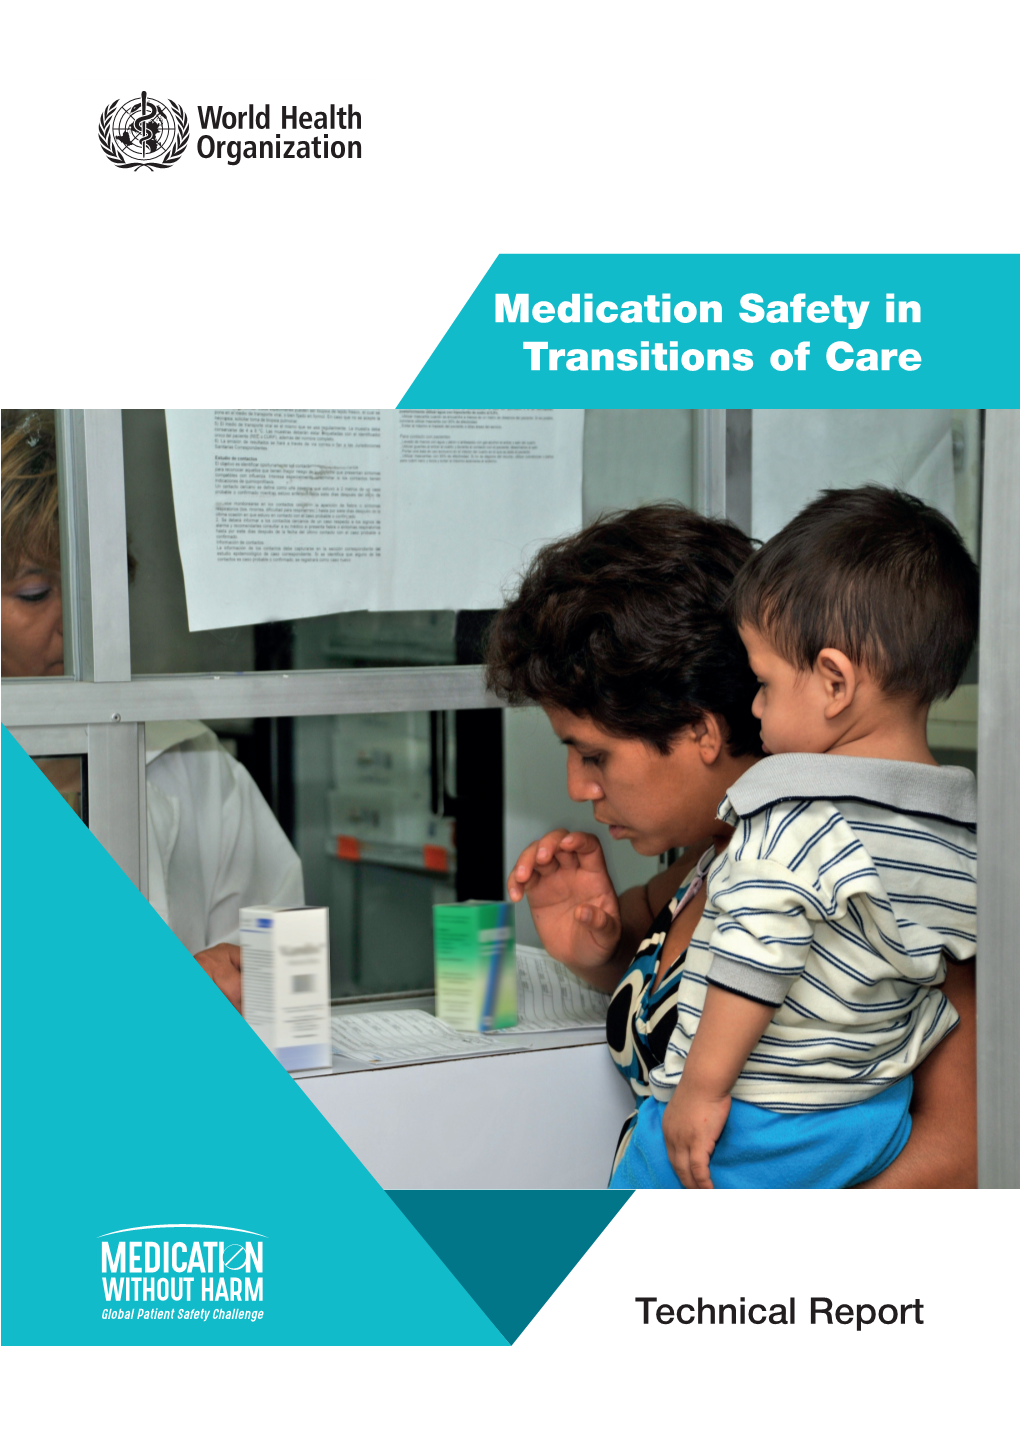 Medication Safety in Transitions of Care